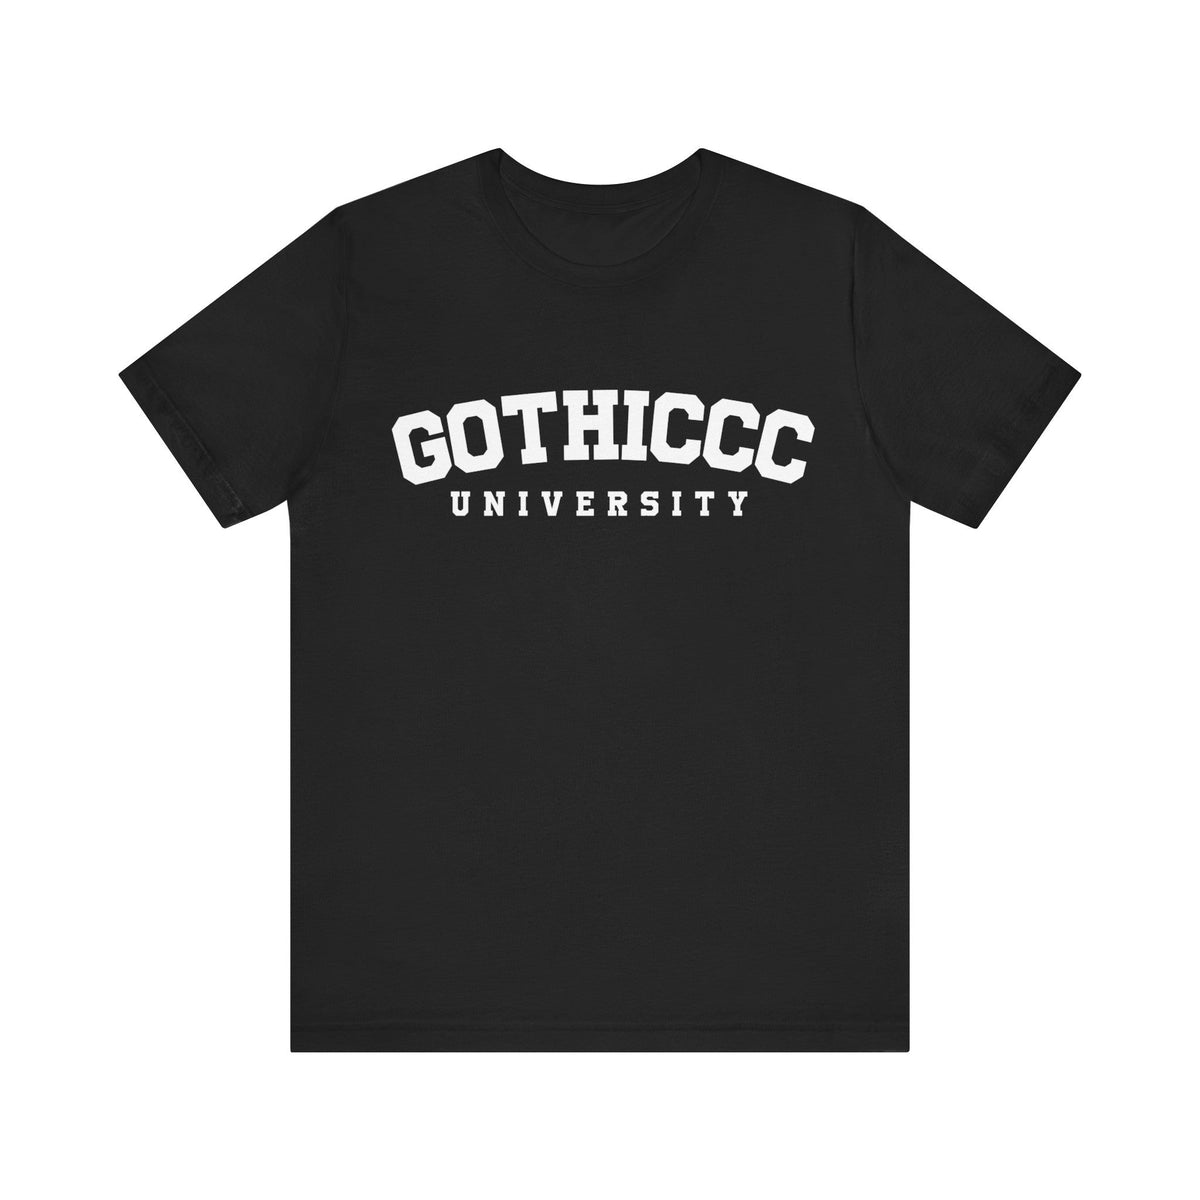 Gothiccc University Short Sleeve Tee - Goth Cloth Co.T - Shirt52157074031151208178